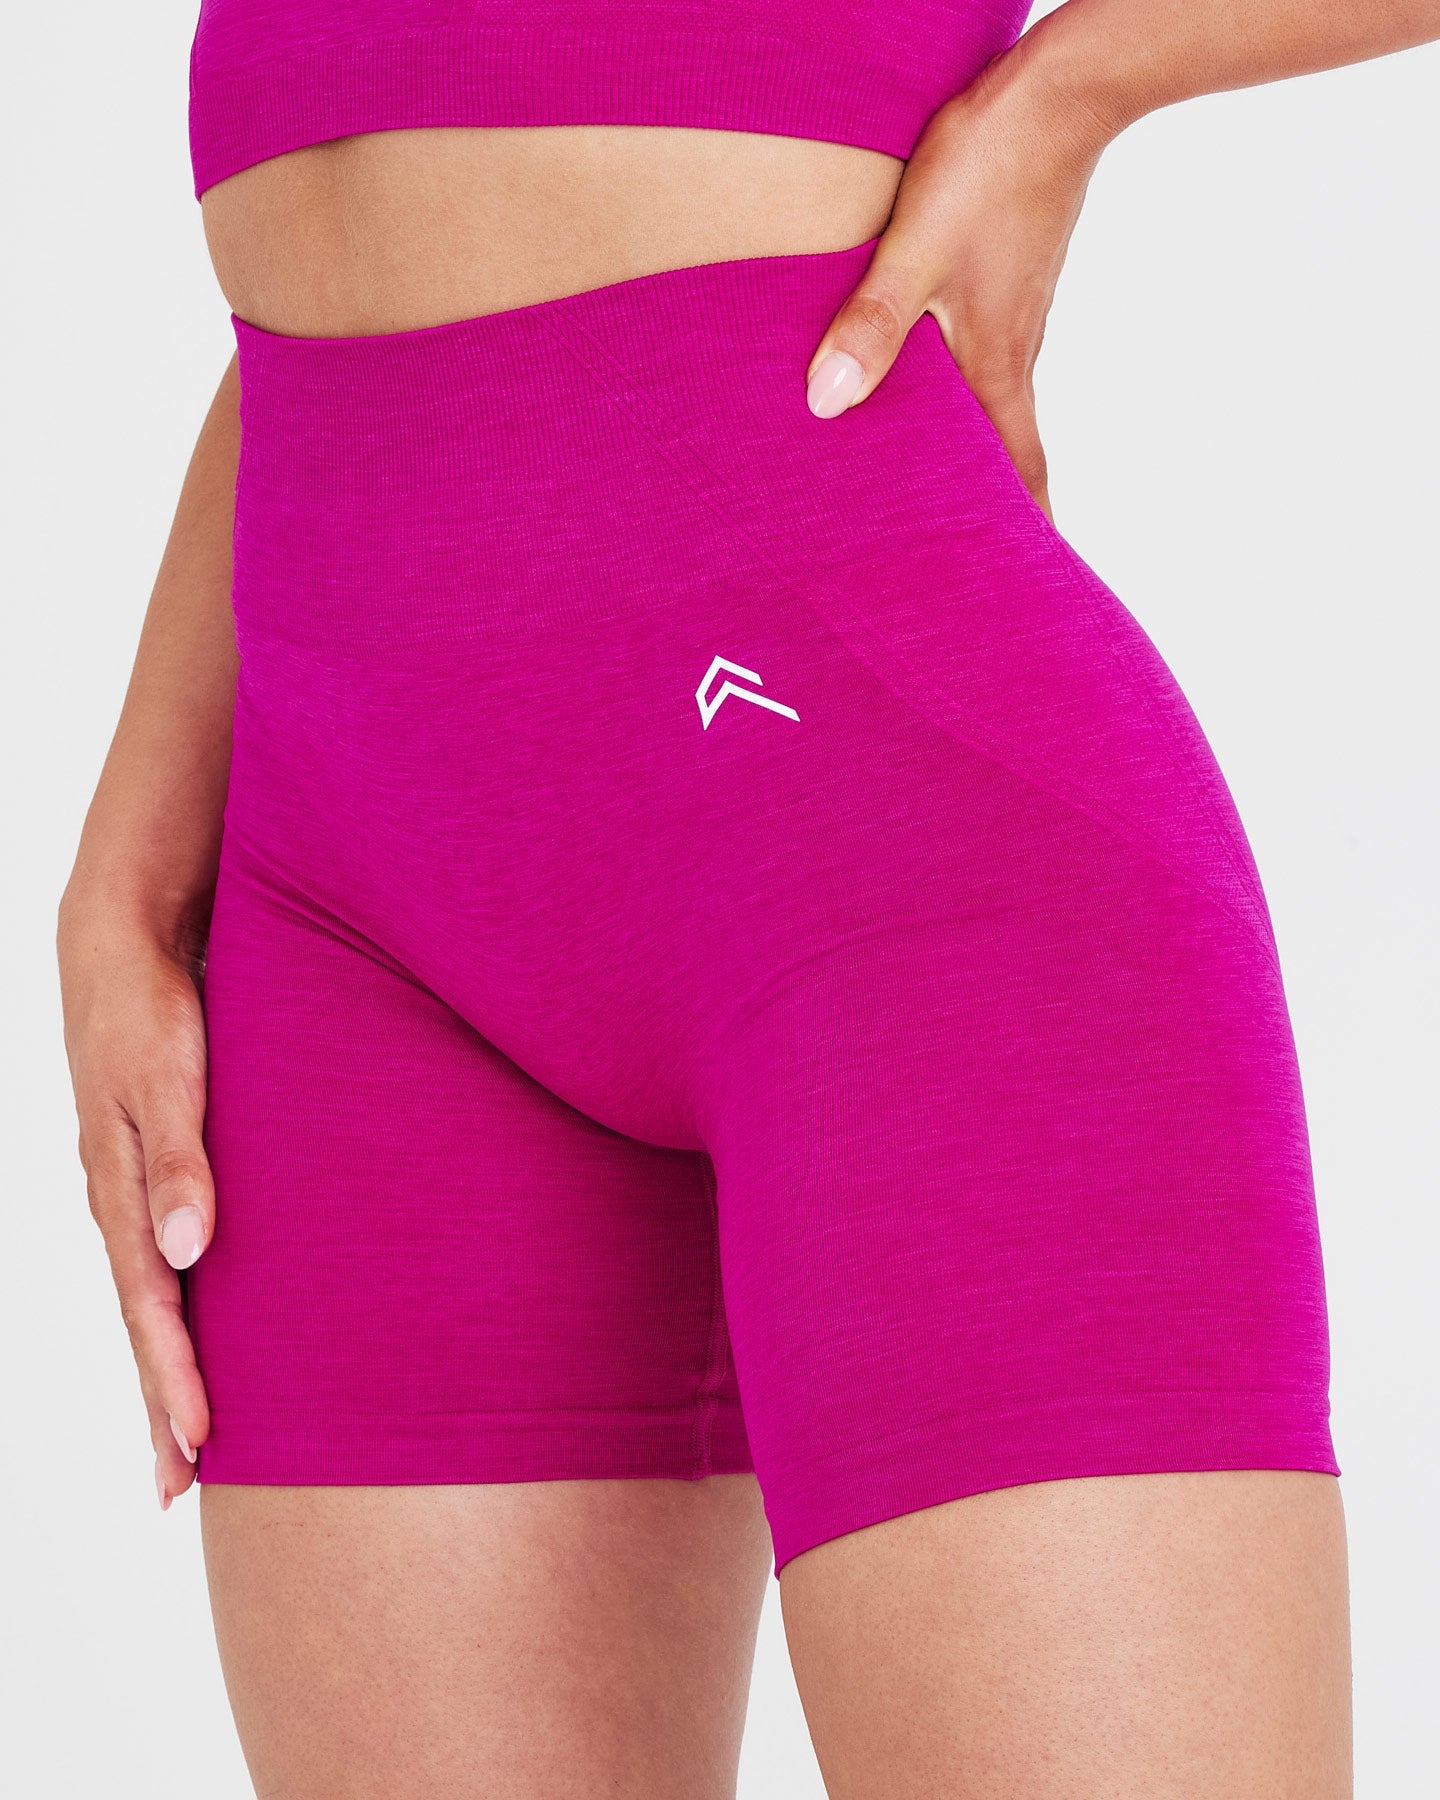  High Waisted Womens Athletic Active Pink Running Shorts - Pull  String Bright Pink Fitness Workout Short for Women (Small, Pink) : Beauty &  Personal Care